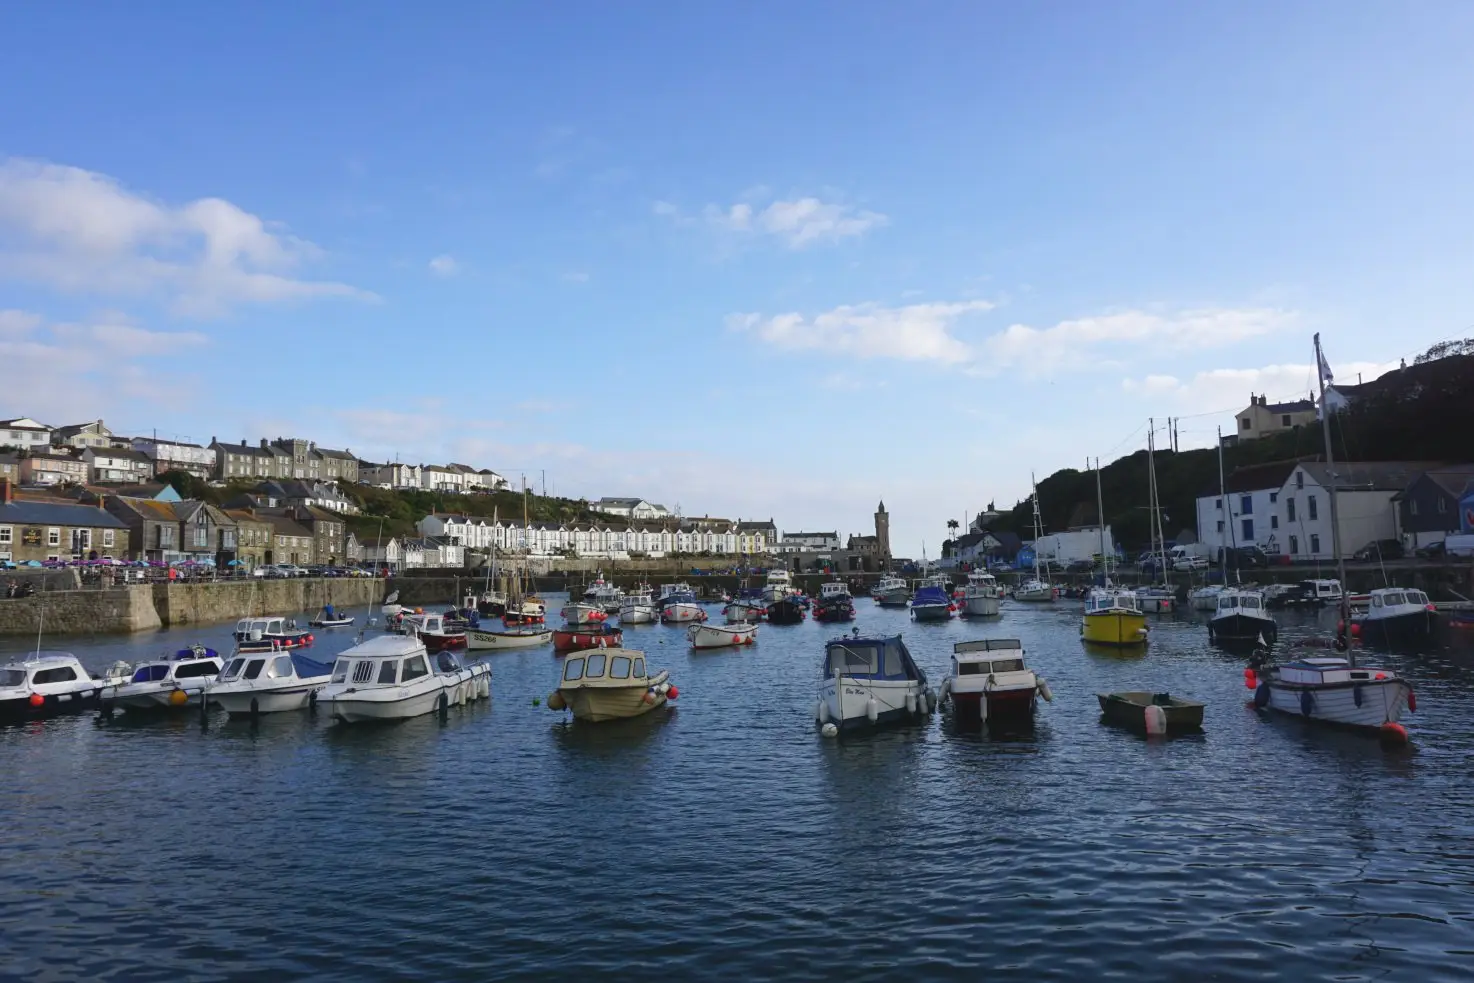 Harbour of Porthleven in Cornwall with moored boats and lined terraced houses